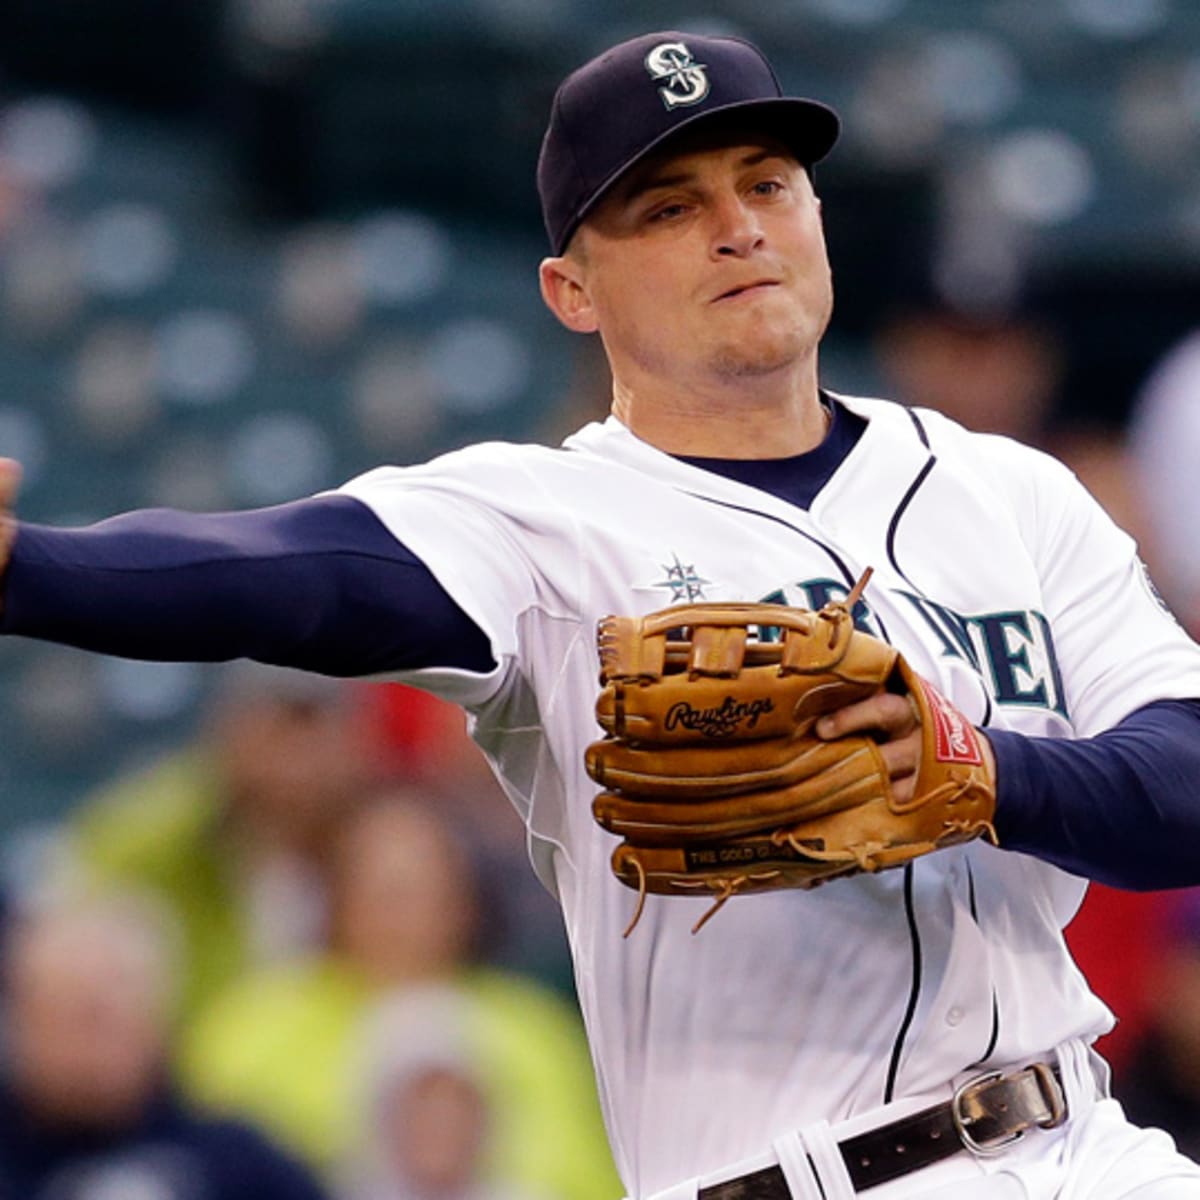 Mariners sign Kyle Seager to $100 million extension in smart move